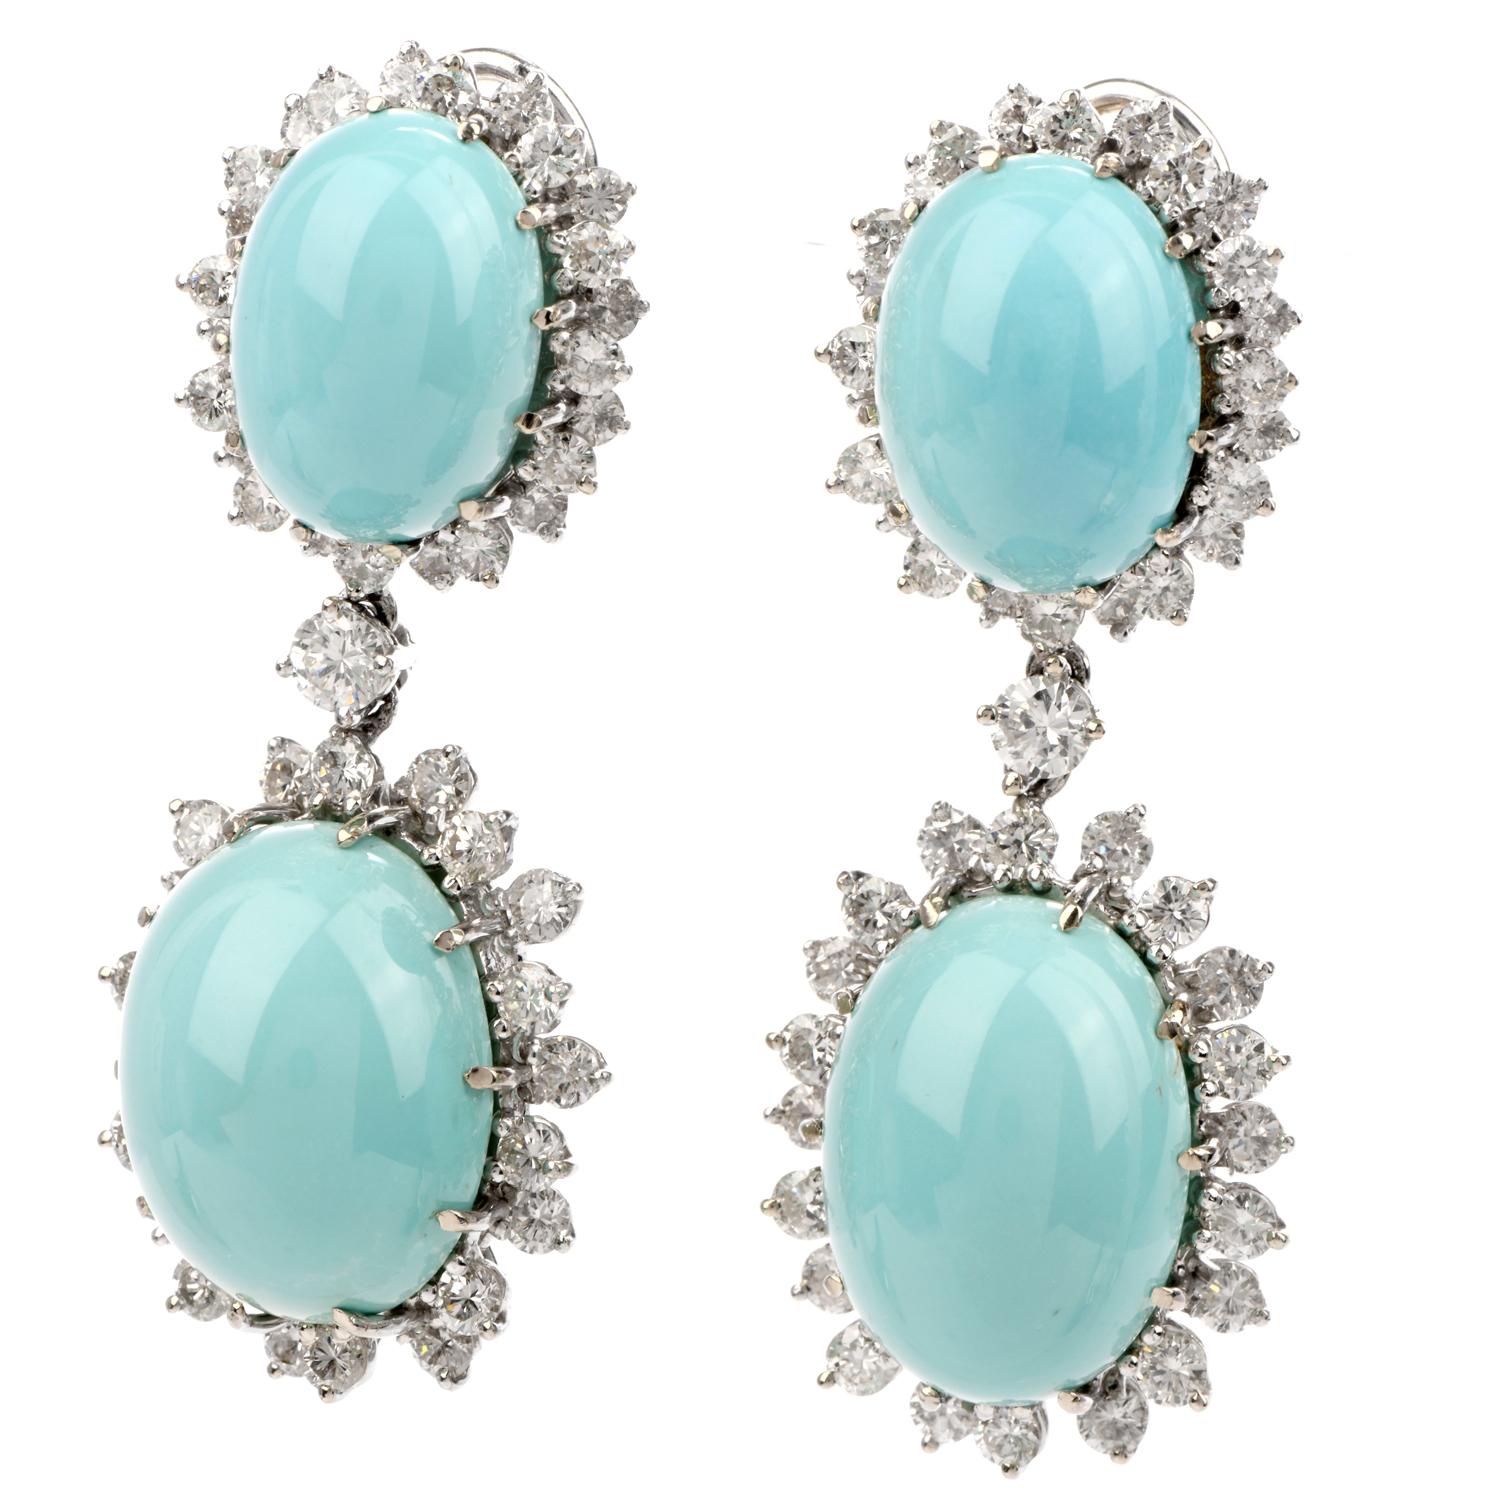 These stunning Vintage 1960's diamond and turquoise dangle earrings are crafted in 14-karat white gold, weighing 26.2 grams and measuring 1.75” long x 19mm wide. Exposing four prong-set oval shaped cabochon Persian turquoise of light teal color